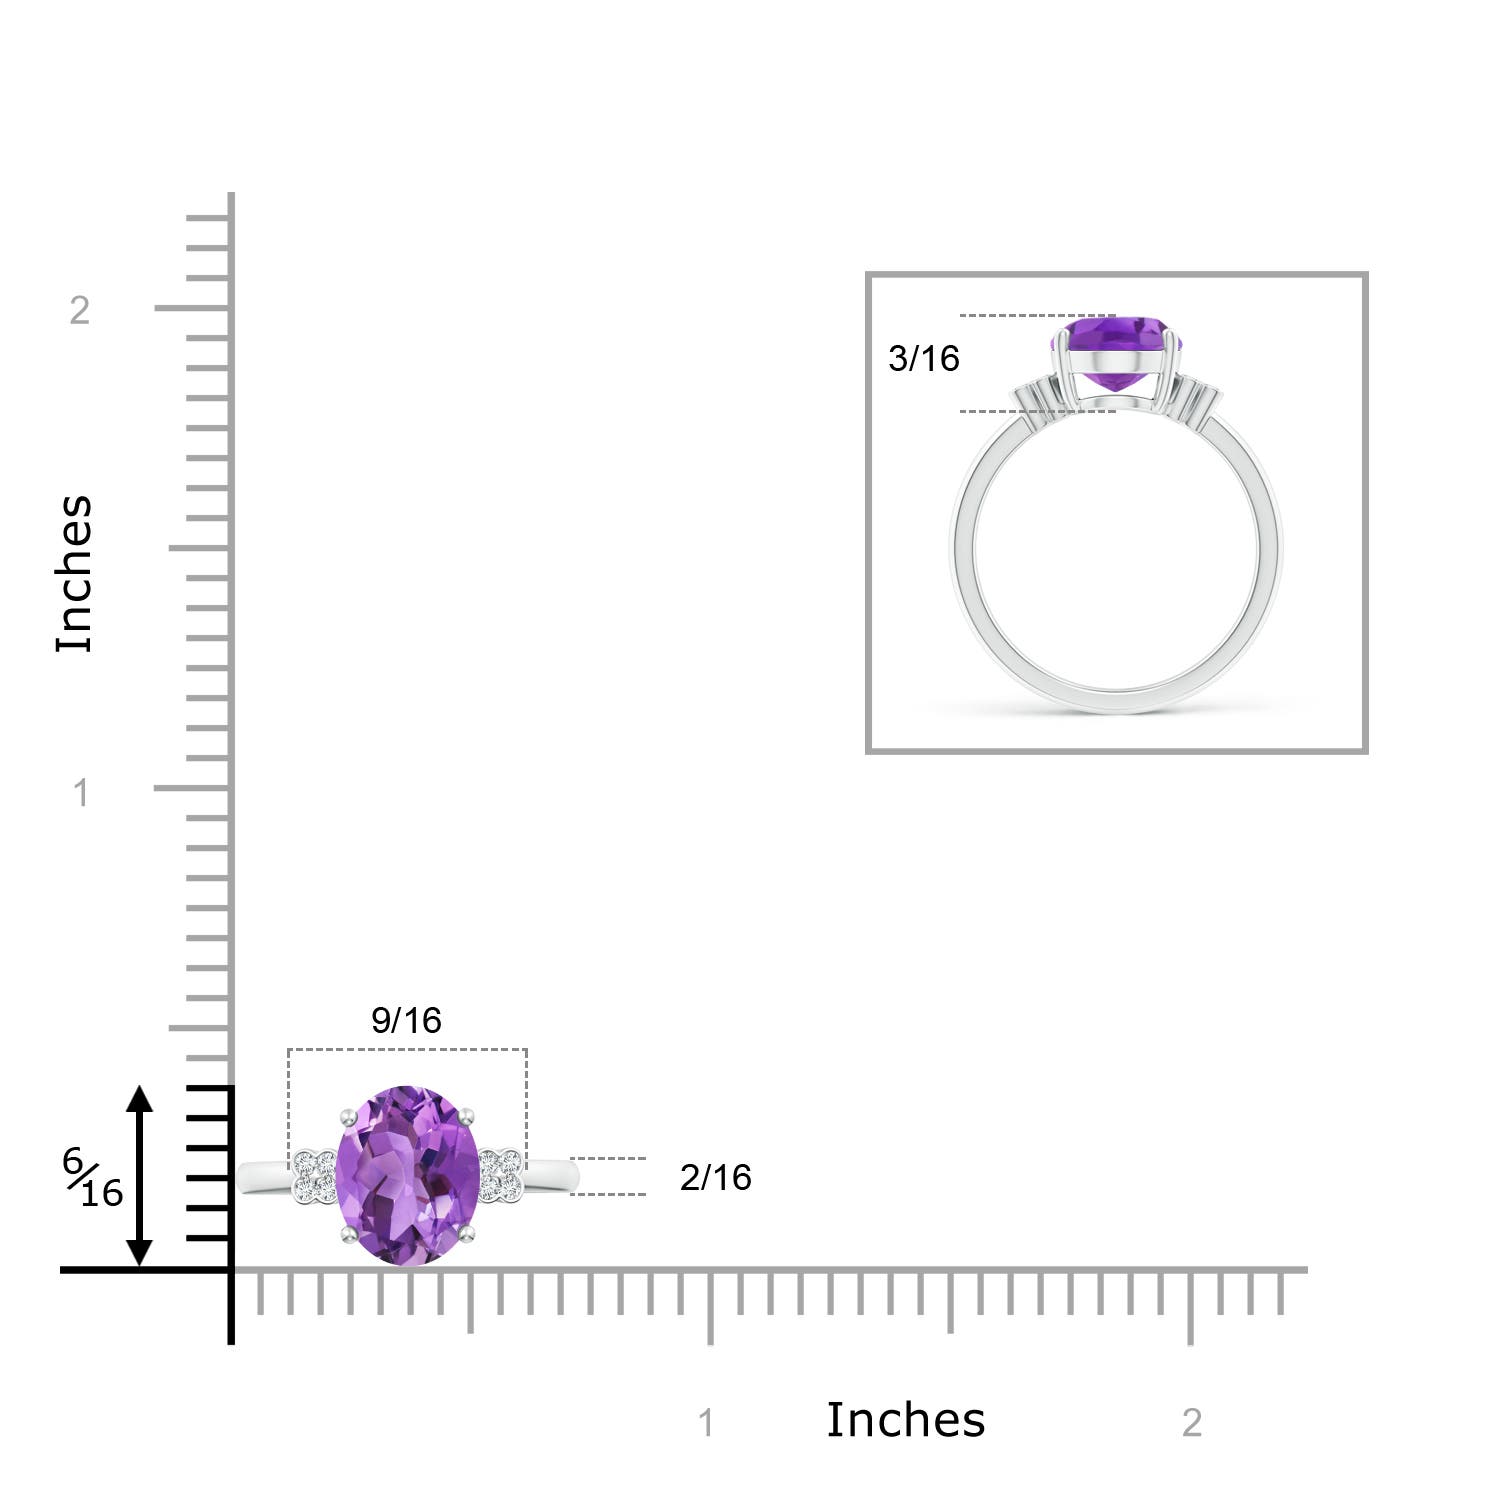 AA - Amethyst / 2.36 CT / 14 KT White Gold